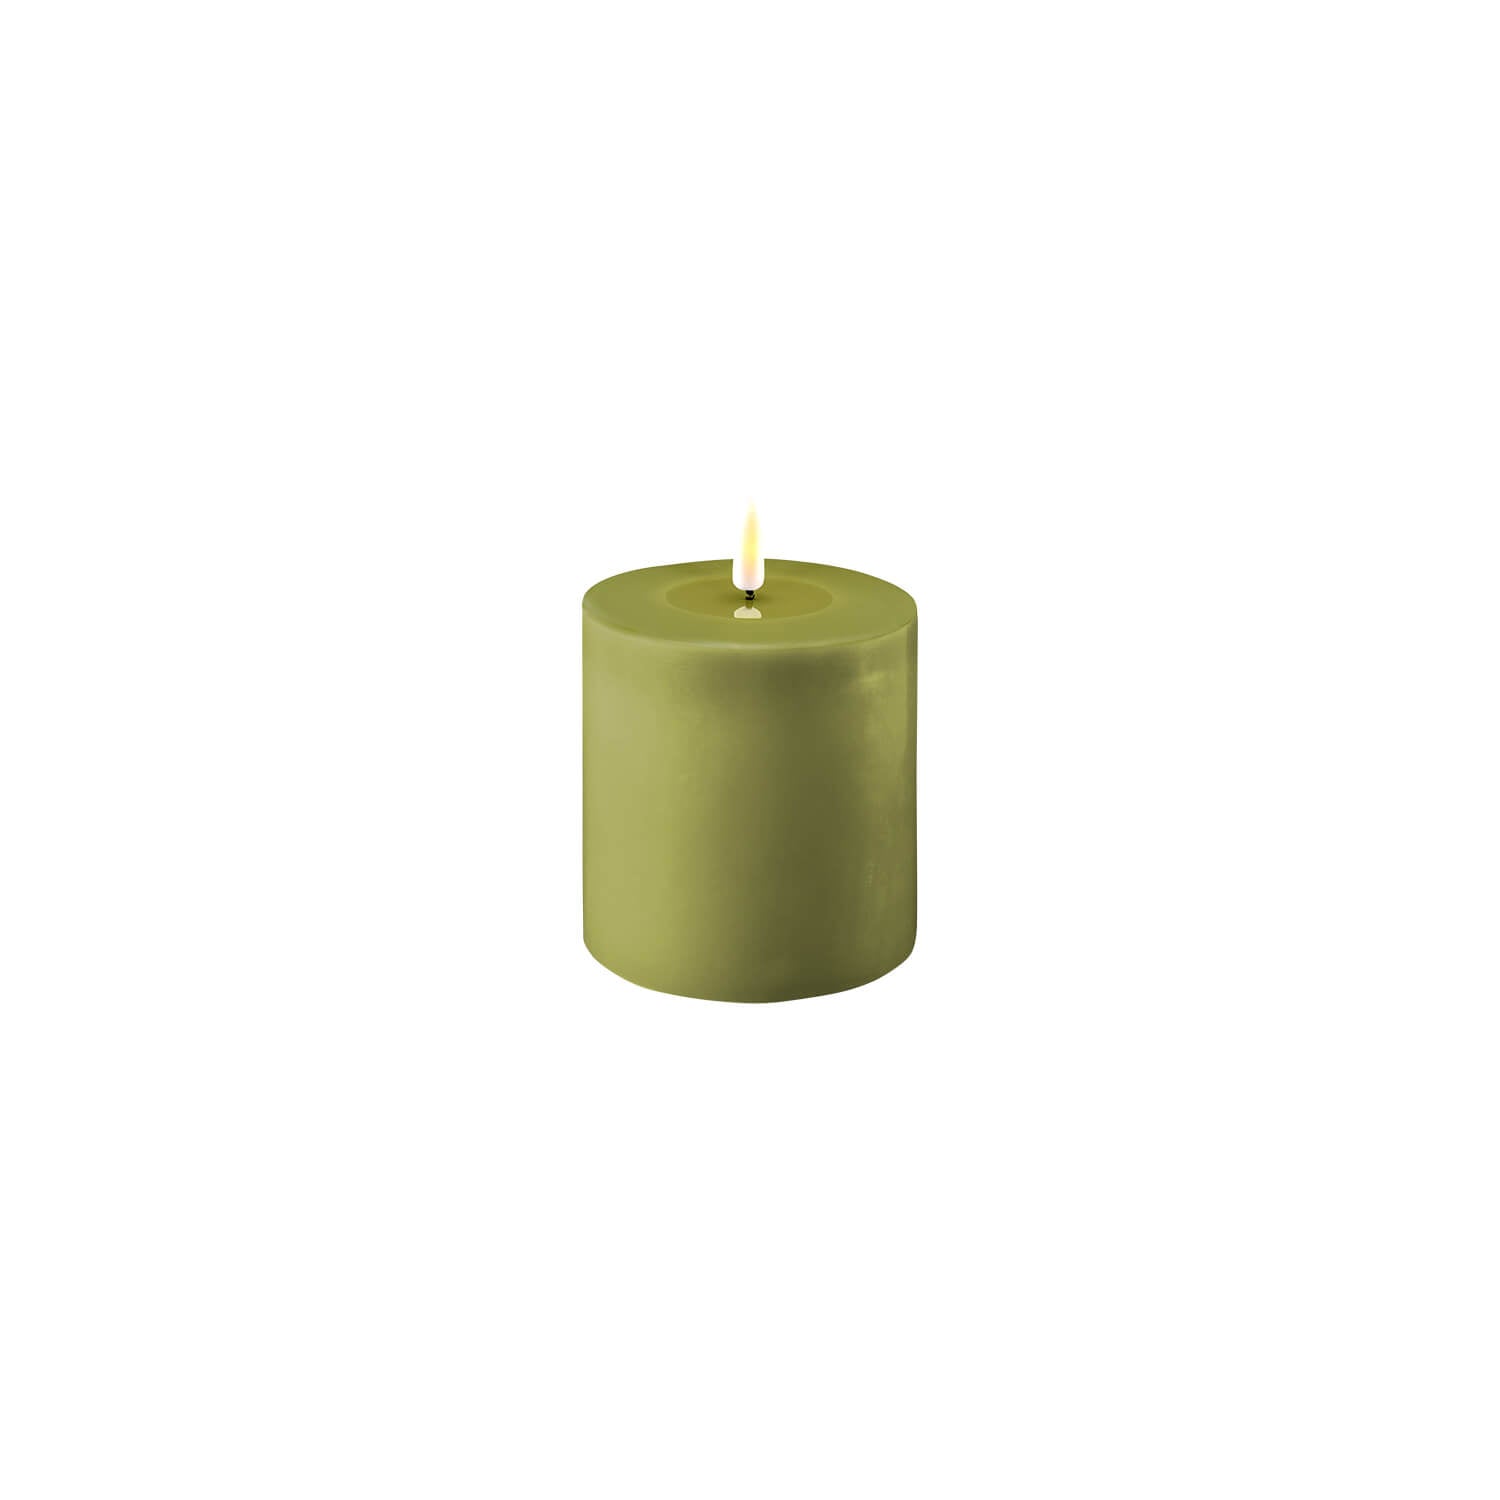 The Home Collection Deluxe LED Candle 10cm x 10cm - Olive Green 1 Shaws Department Stores